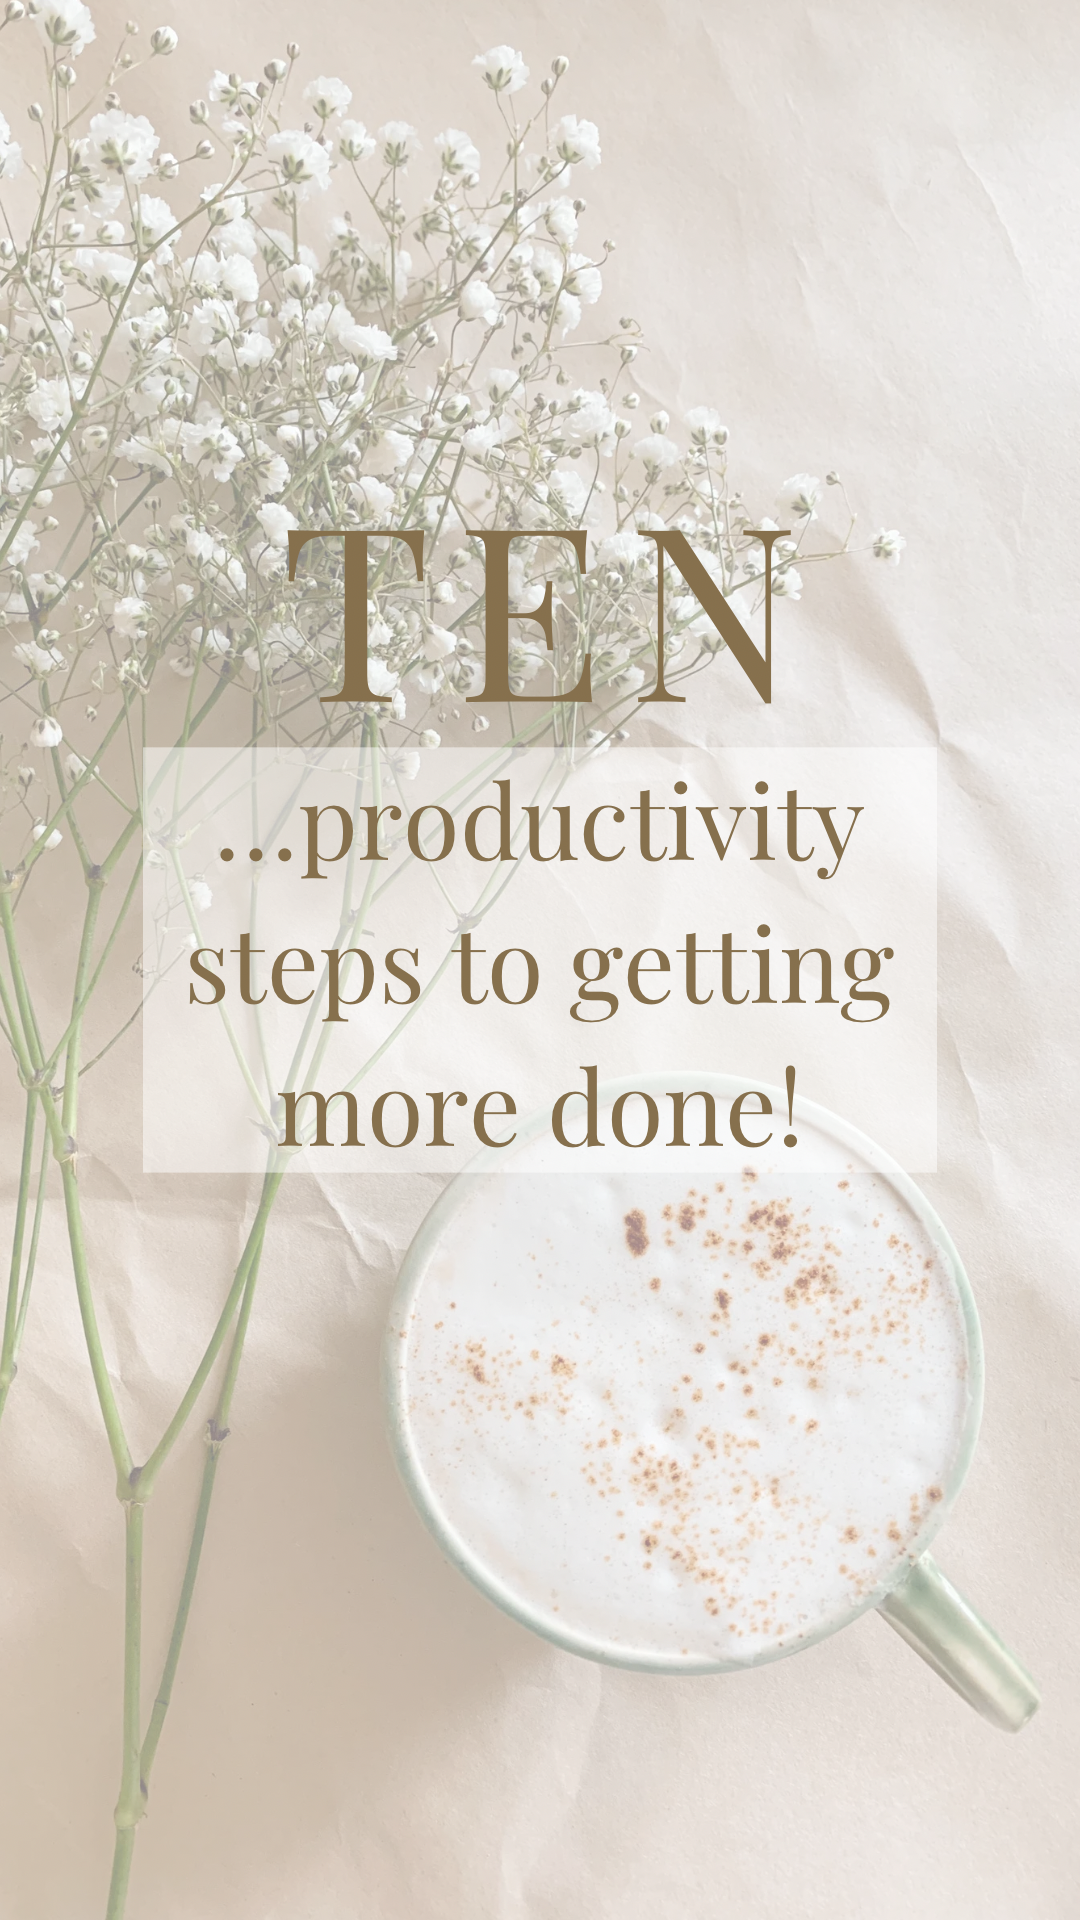 Step-by-Step Productivity guide